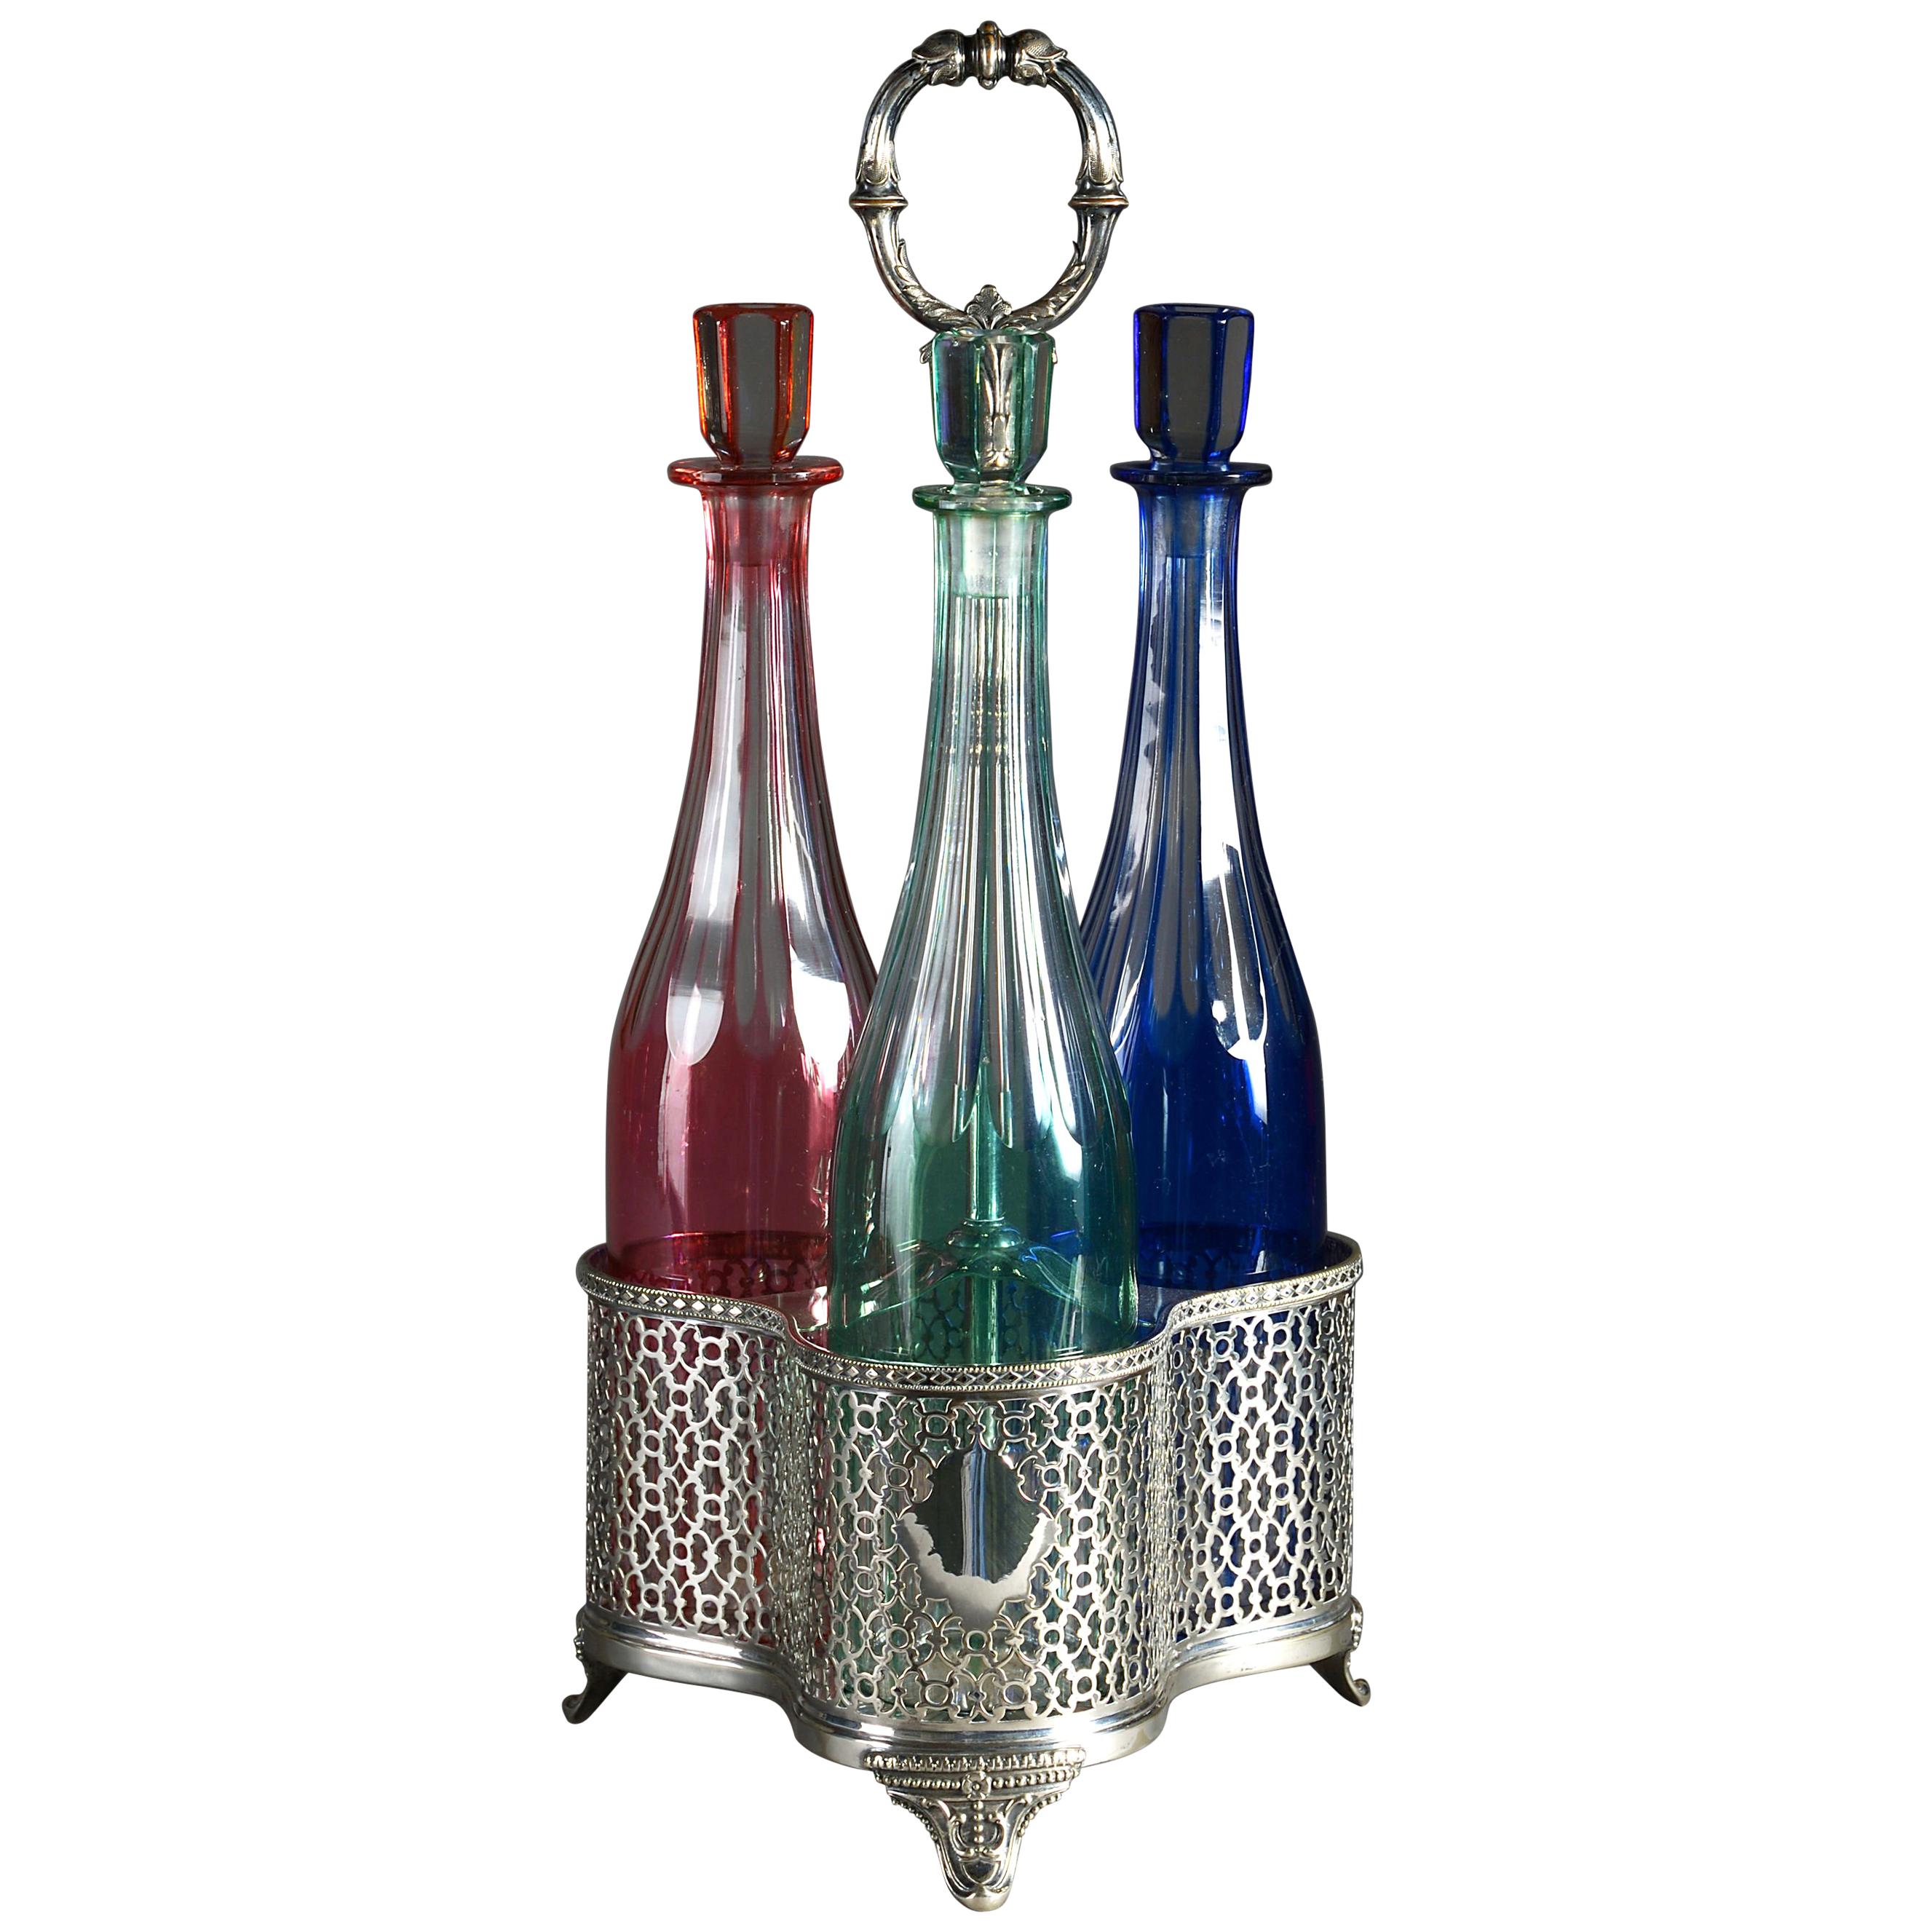  Silvered Bottle Carrier and Three Coloured Glass Cordial Bottles 